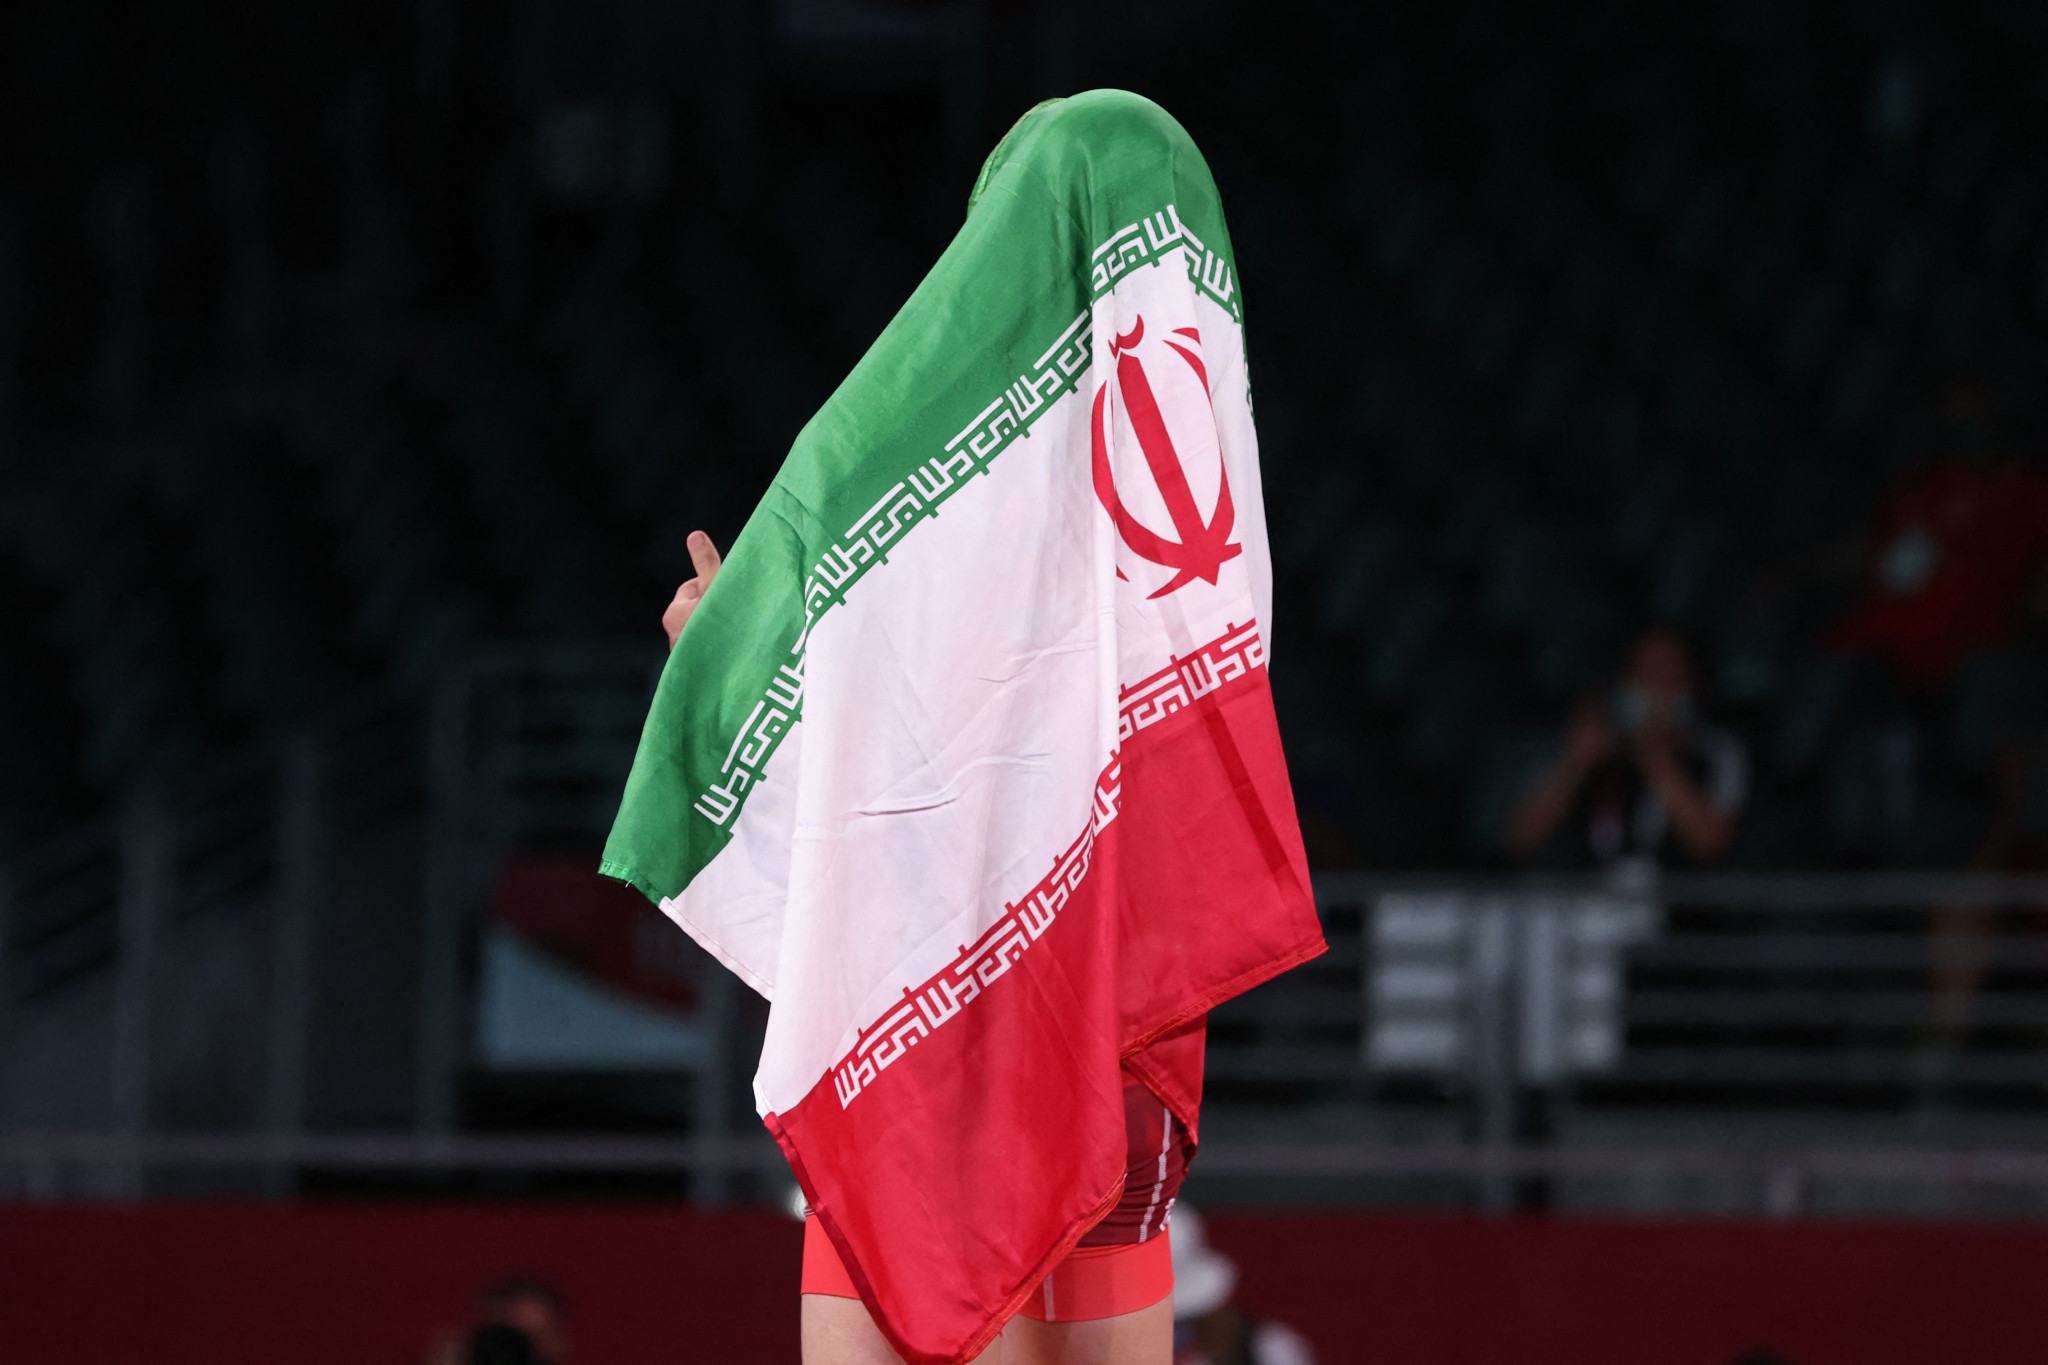 The NOCIRI leader believes bust ceremonies send a message to Iranian athletes that their work will not be forgotten ©Getty Images